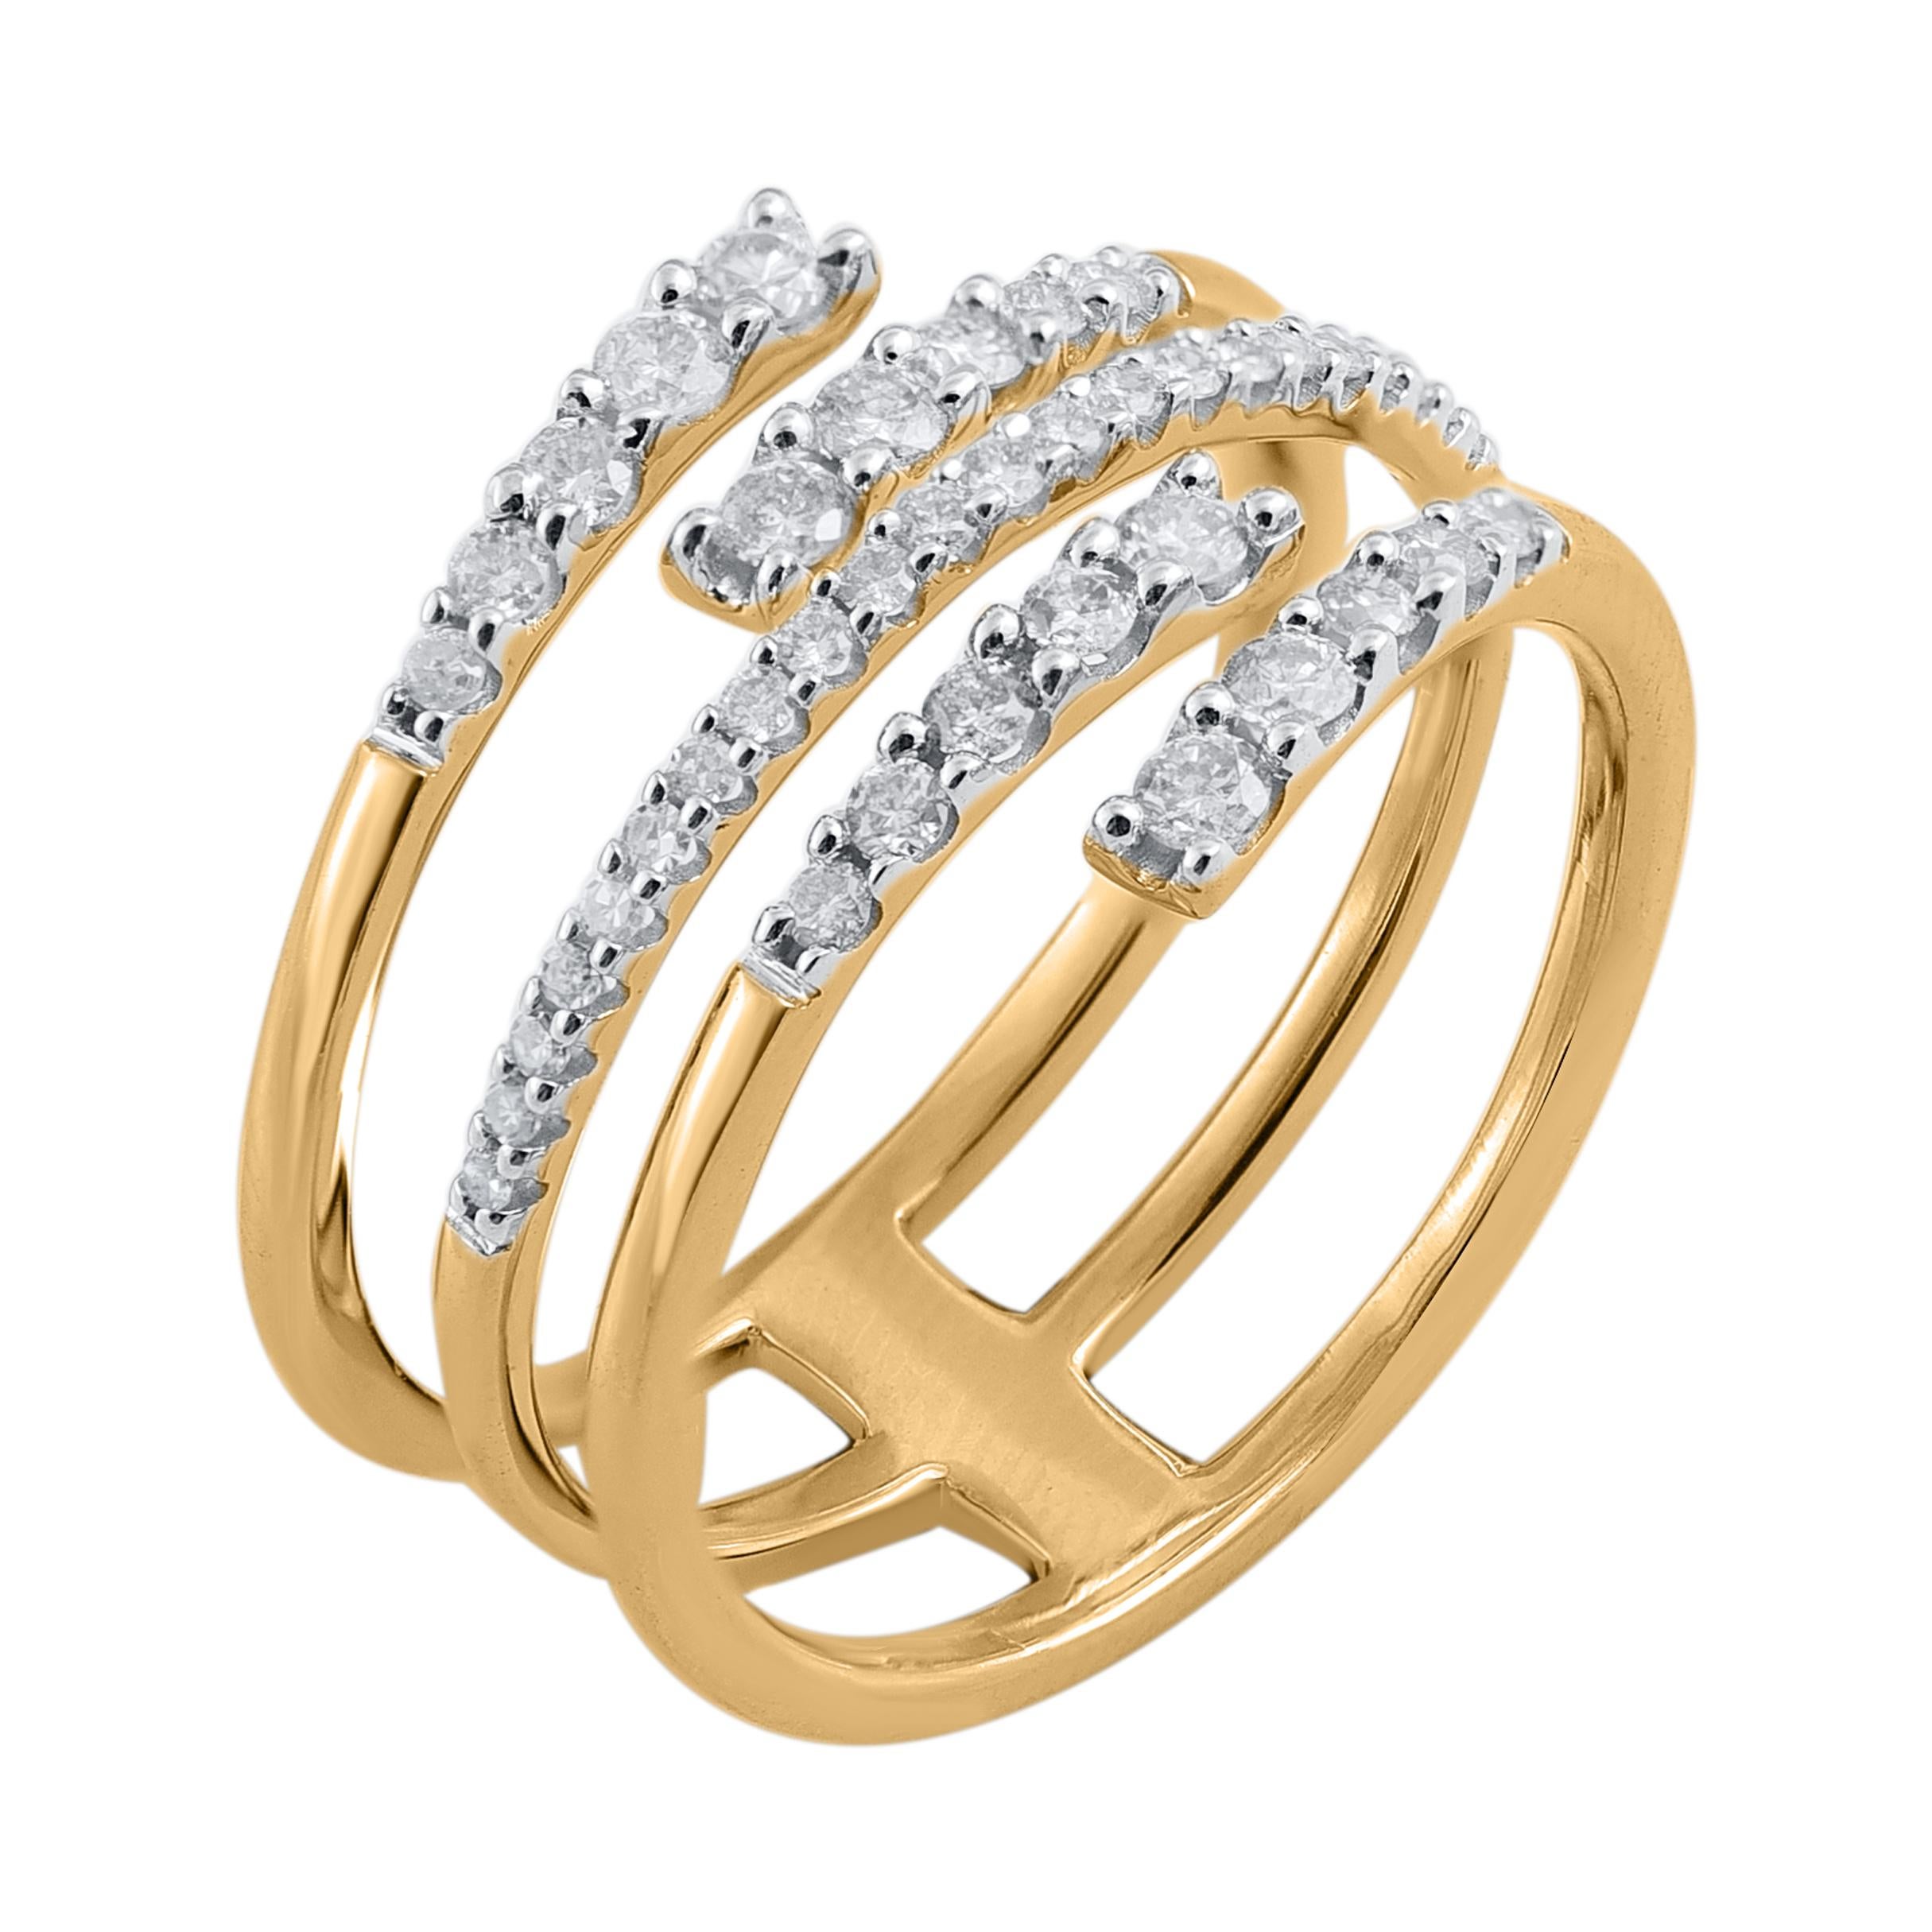 Bring charm to your look with this diamond band Ring. This ring is beautifully crafted in 14 Karat yellow gold and embedded with 51 brilliant cut & single cut round diamonds in prong setting. Total diamond weight is 0.50 carat. The diamonds are